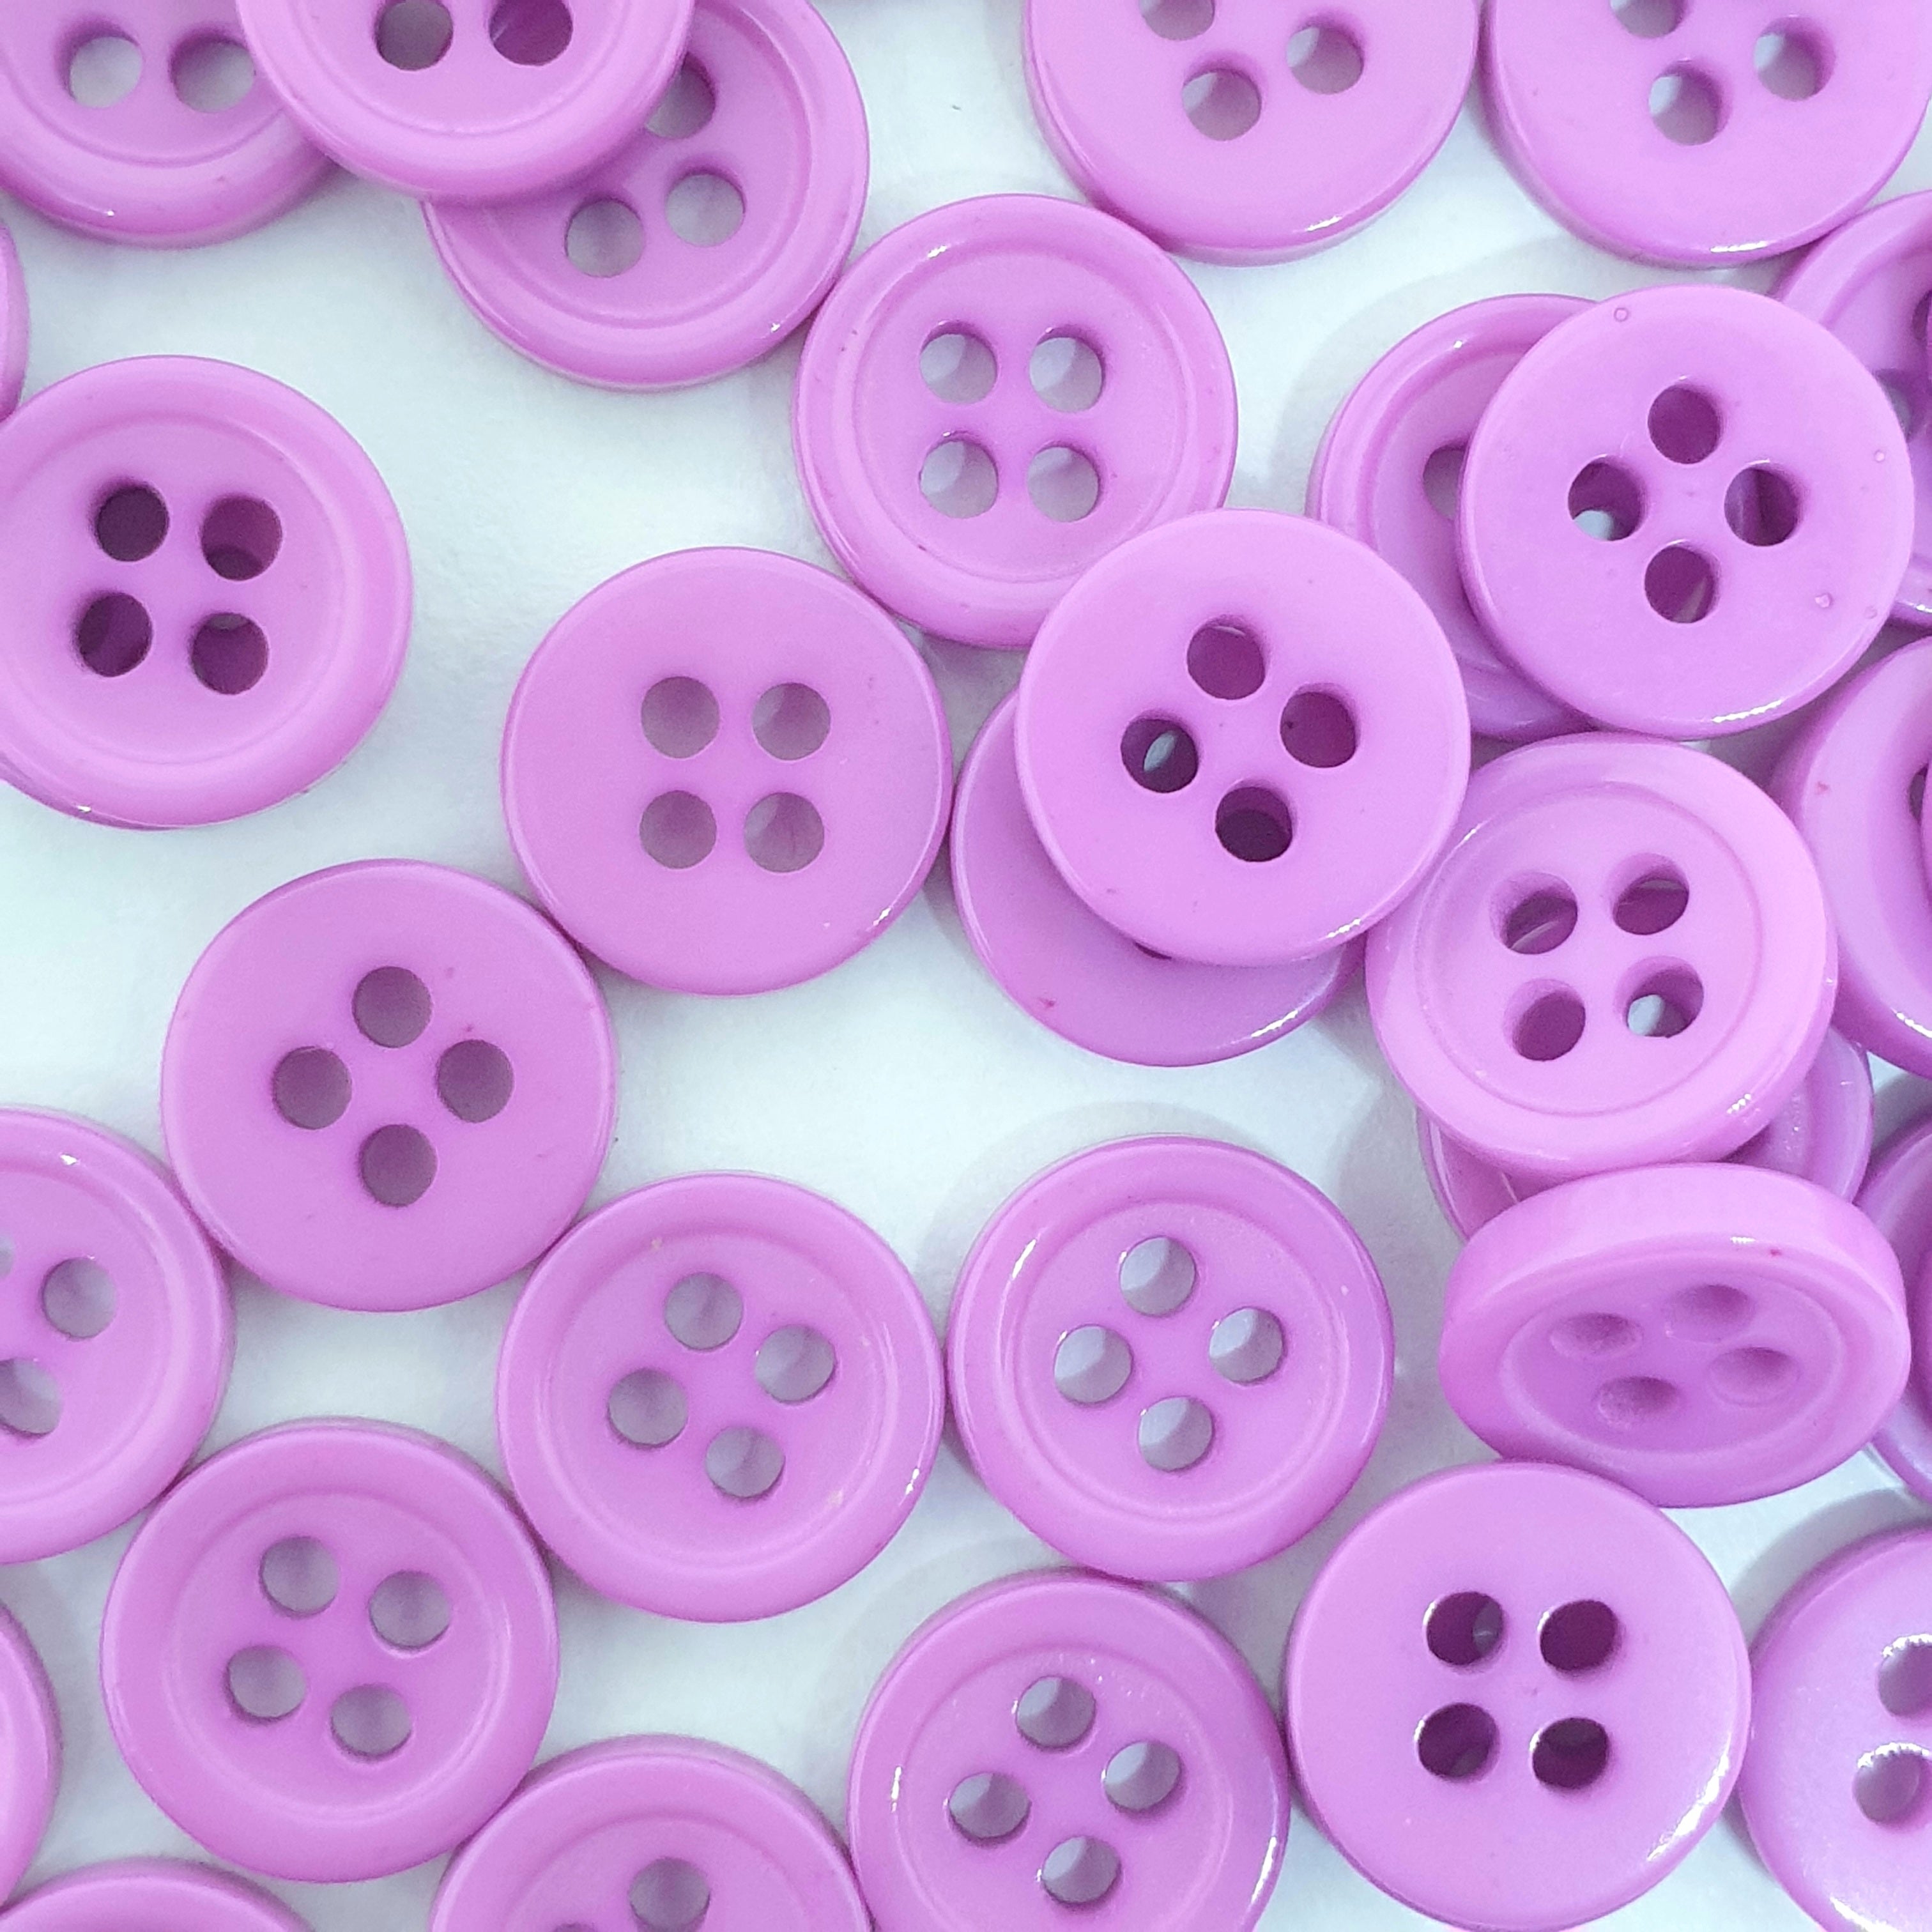 MajorCrafts 120pcs 9mm Light Purple 4 Holes Small Round Resin Sewing Buttons